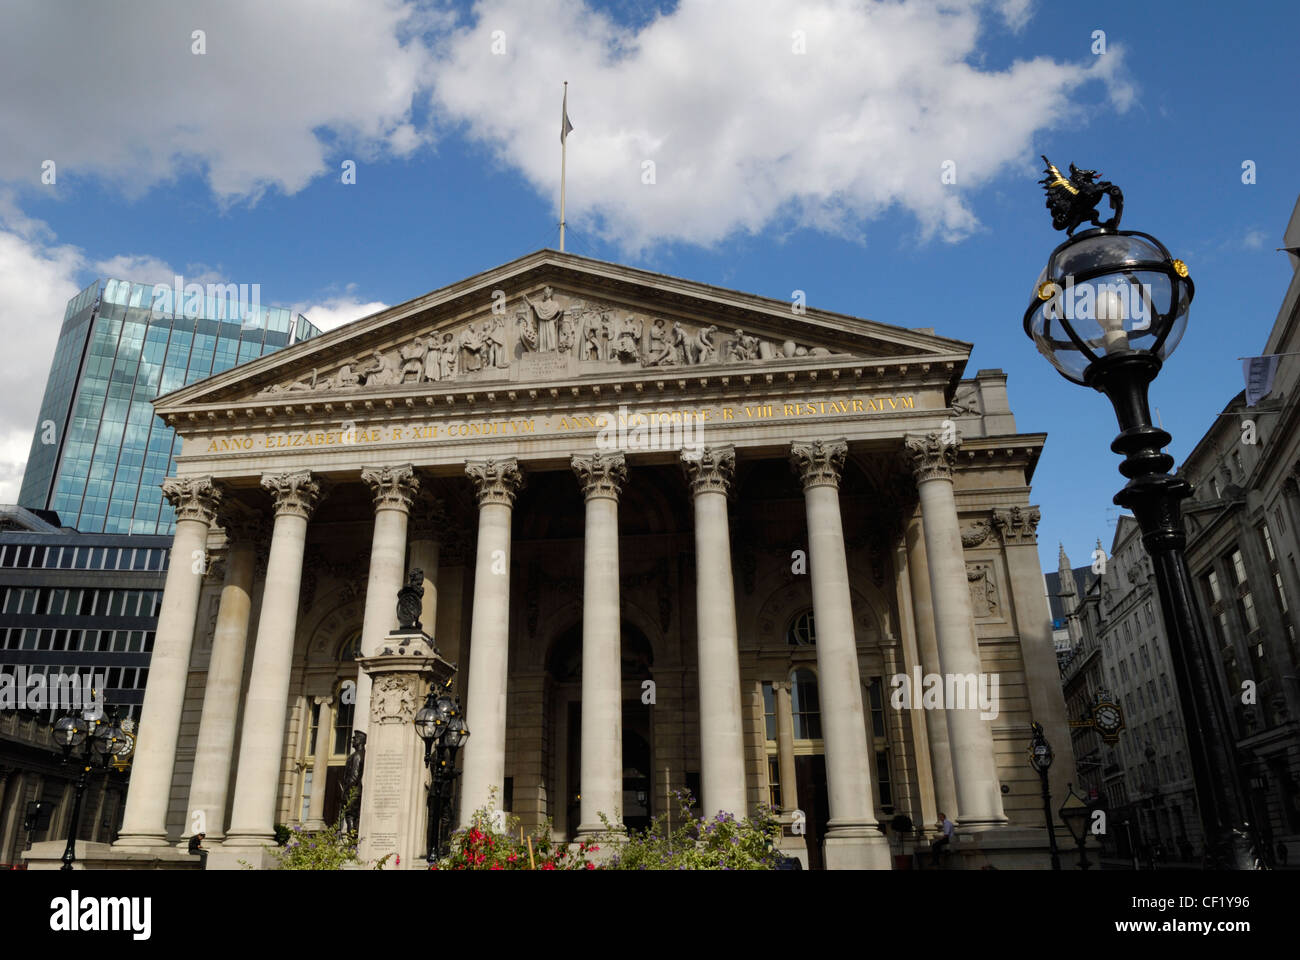 The Royal Exchange building in the City of London, extensively remodelled in 2001 to become home to some of the world's finest l Stock Photo